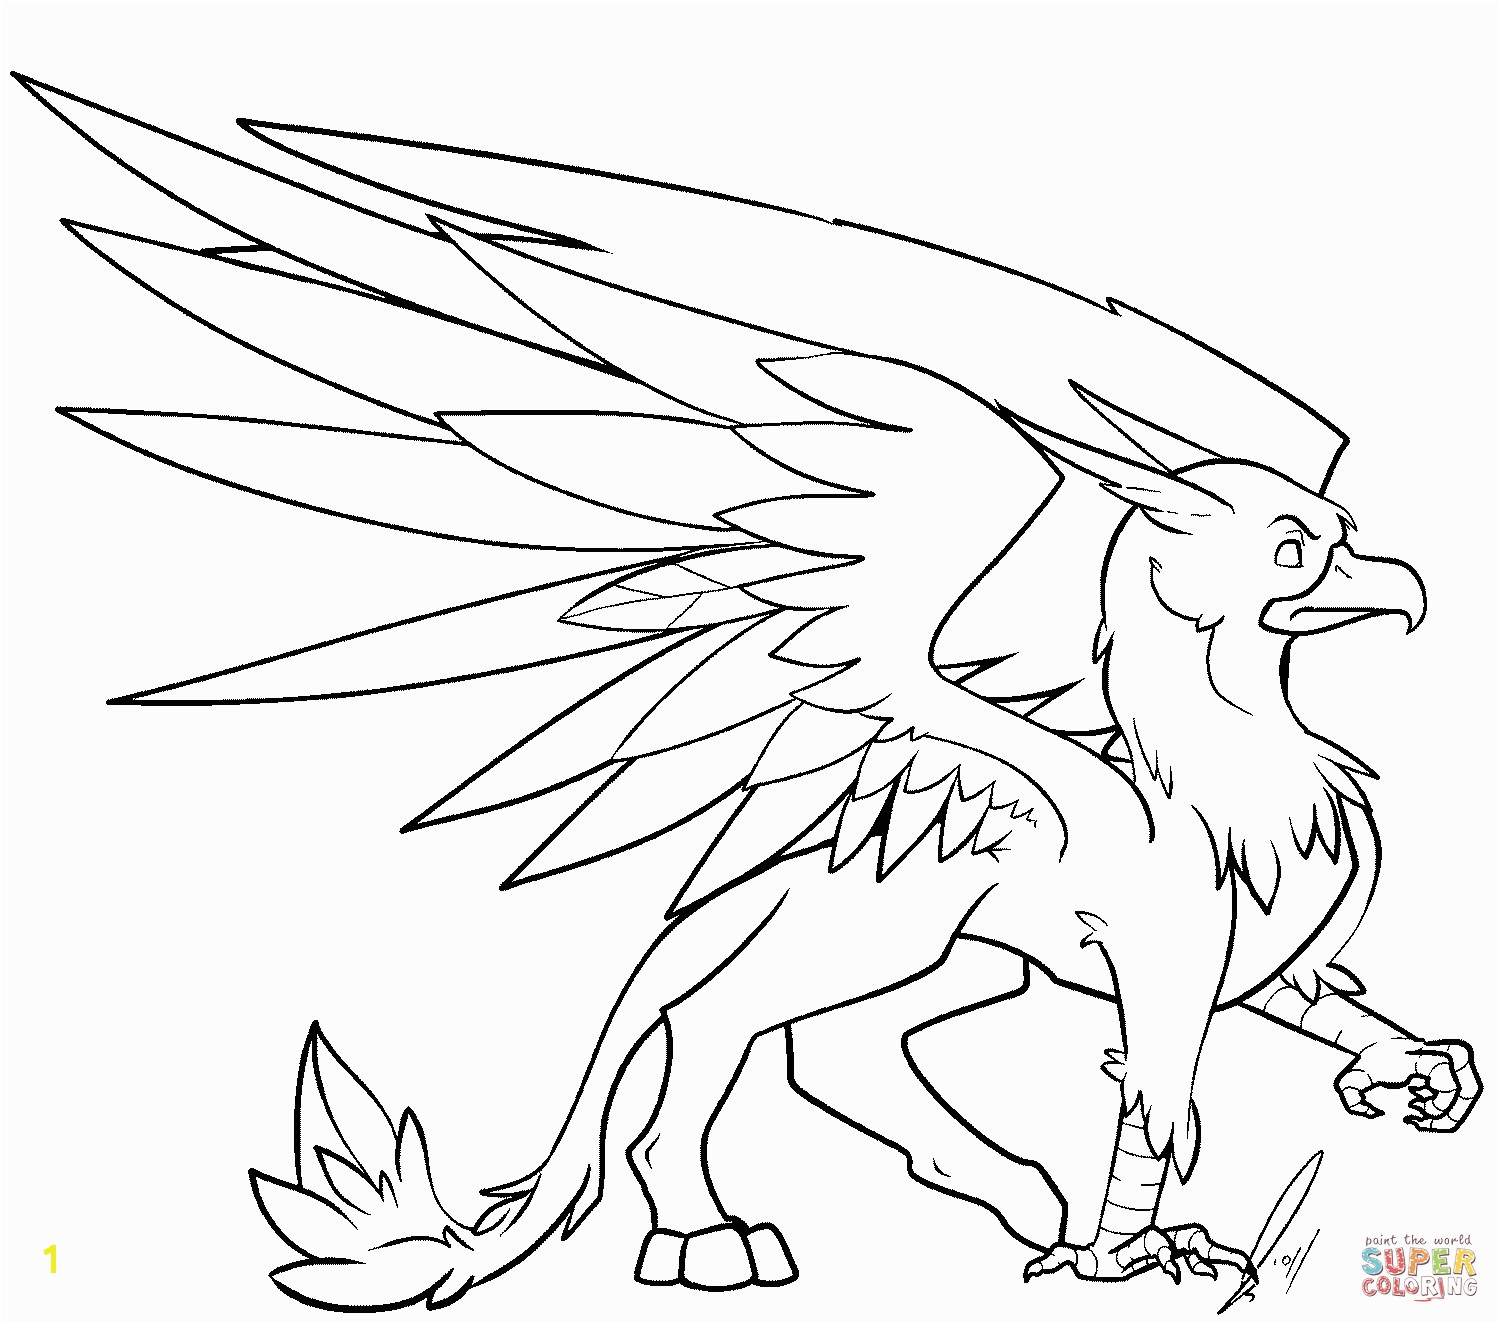 the Griffin coloring pages